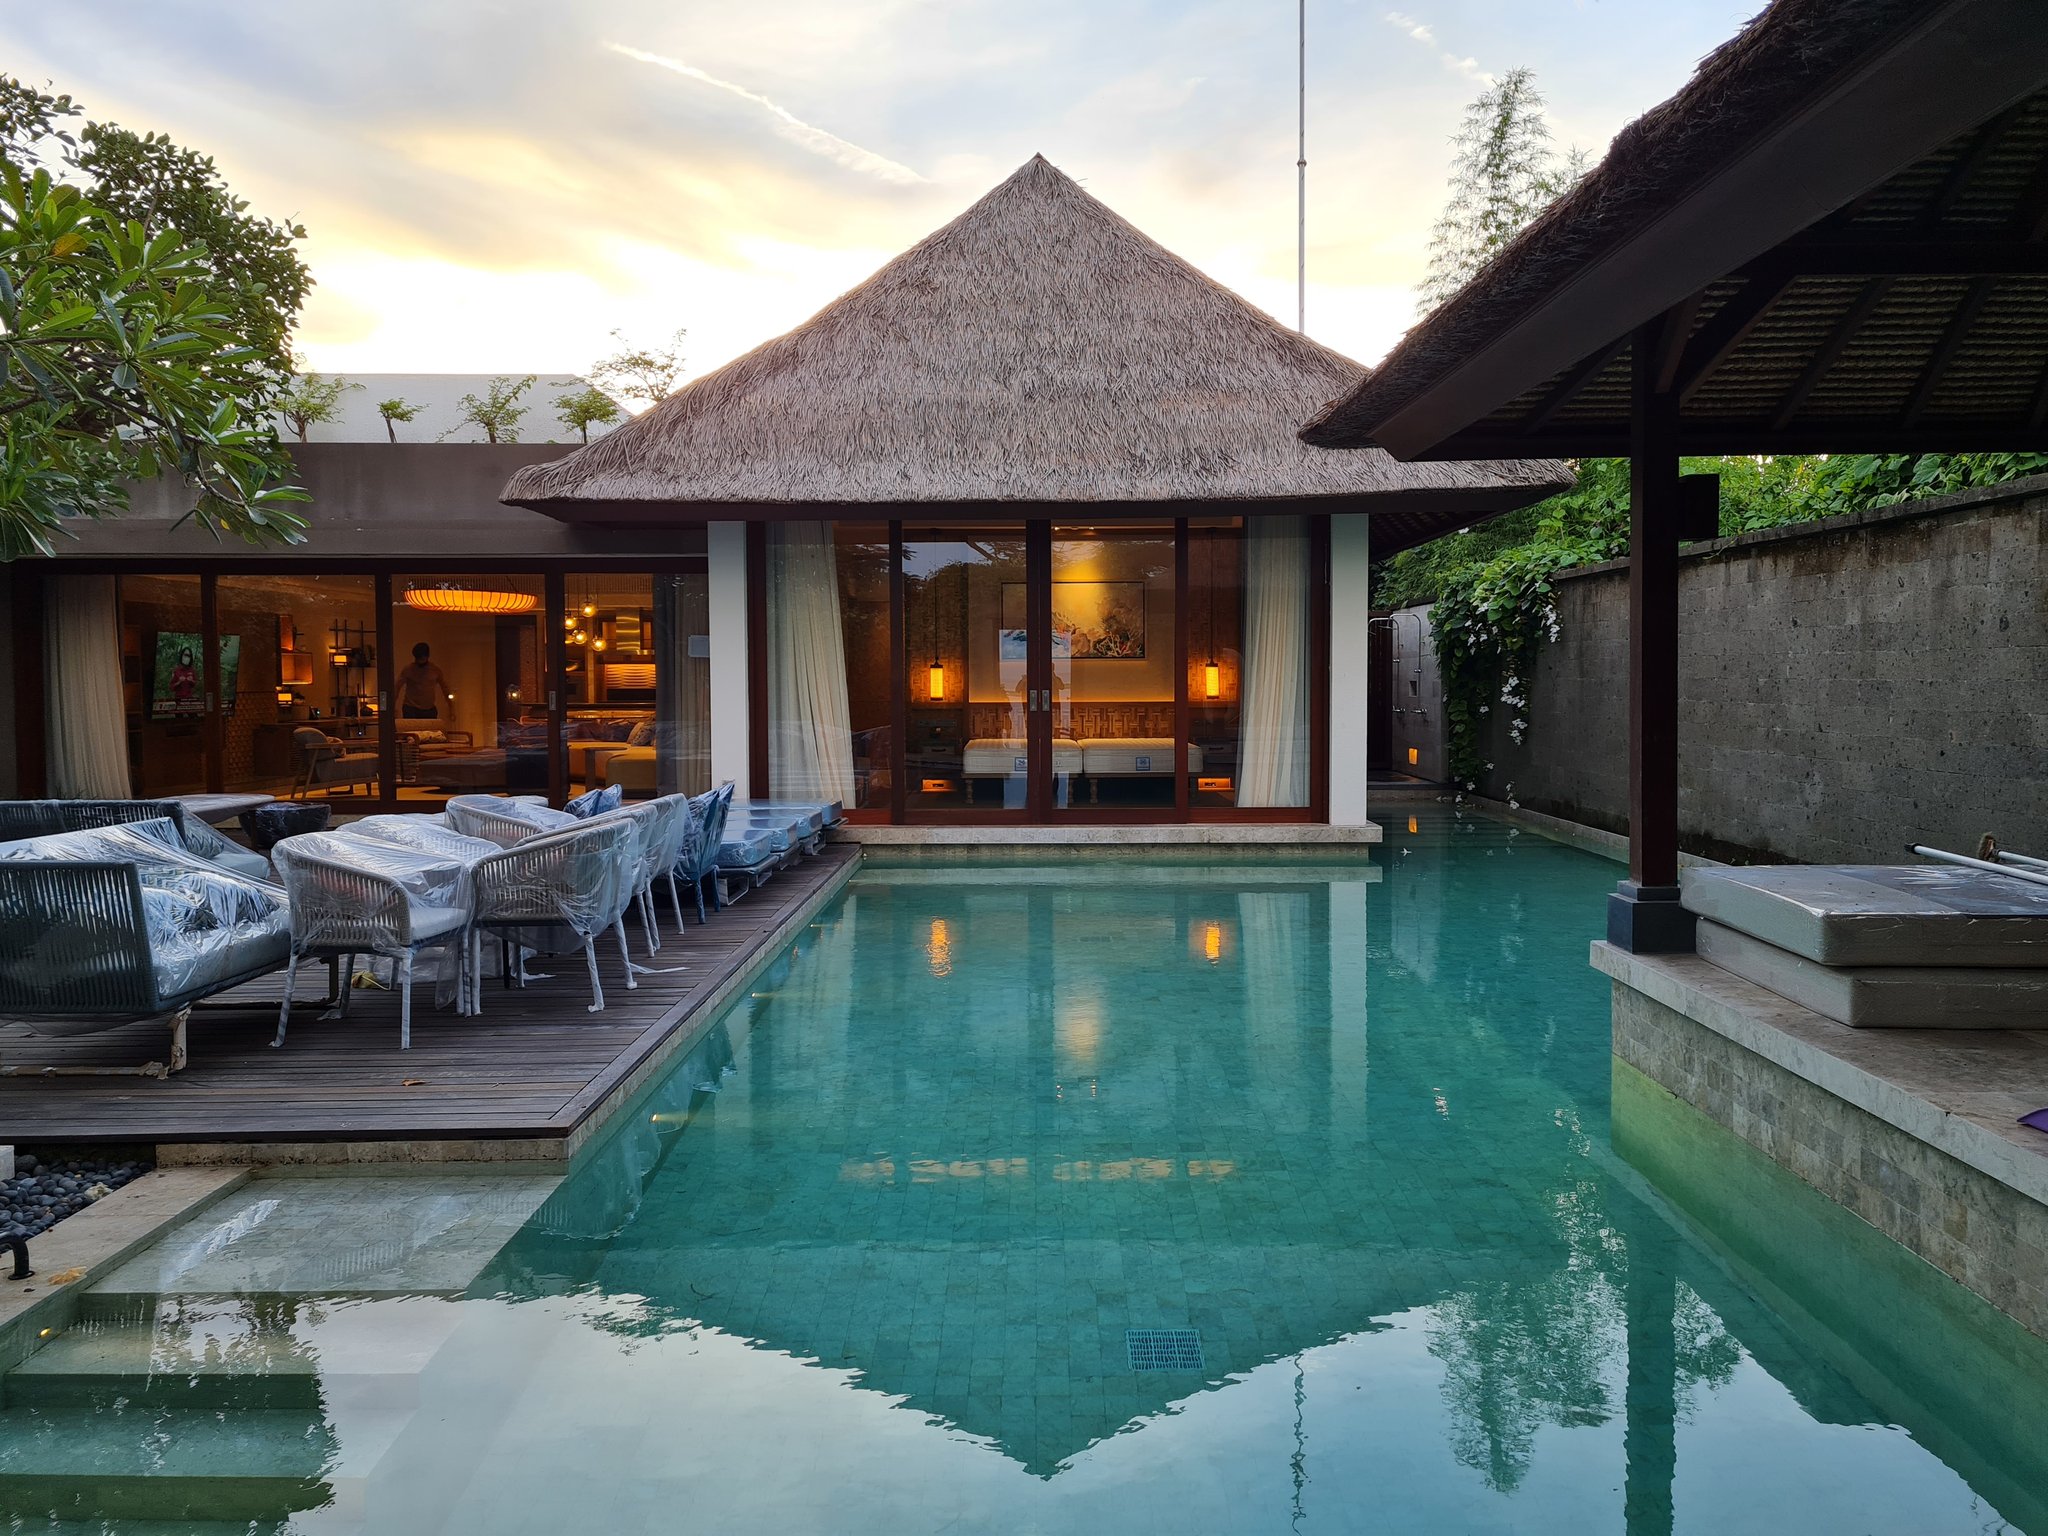 The Andaz Bali Opens In A Week, Here's A Preview - View from the Wing